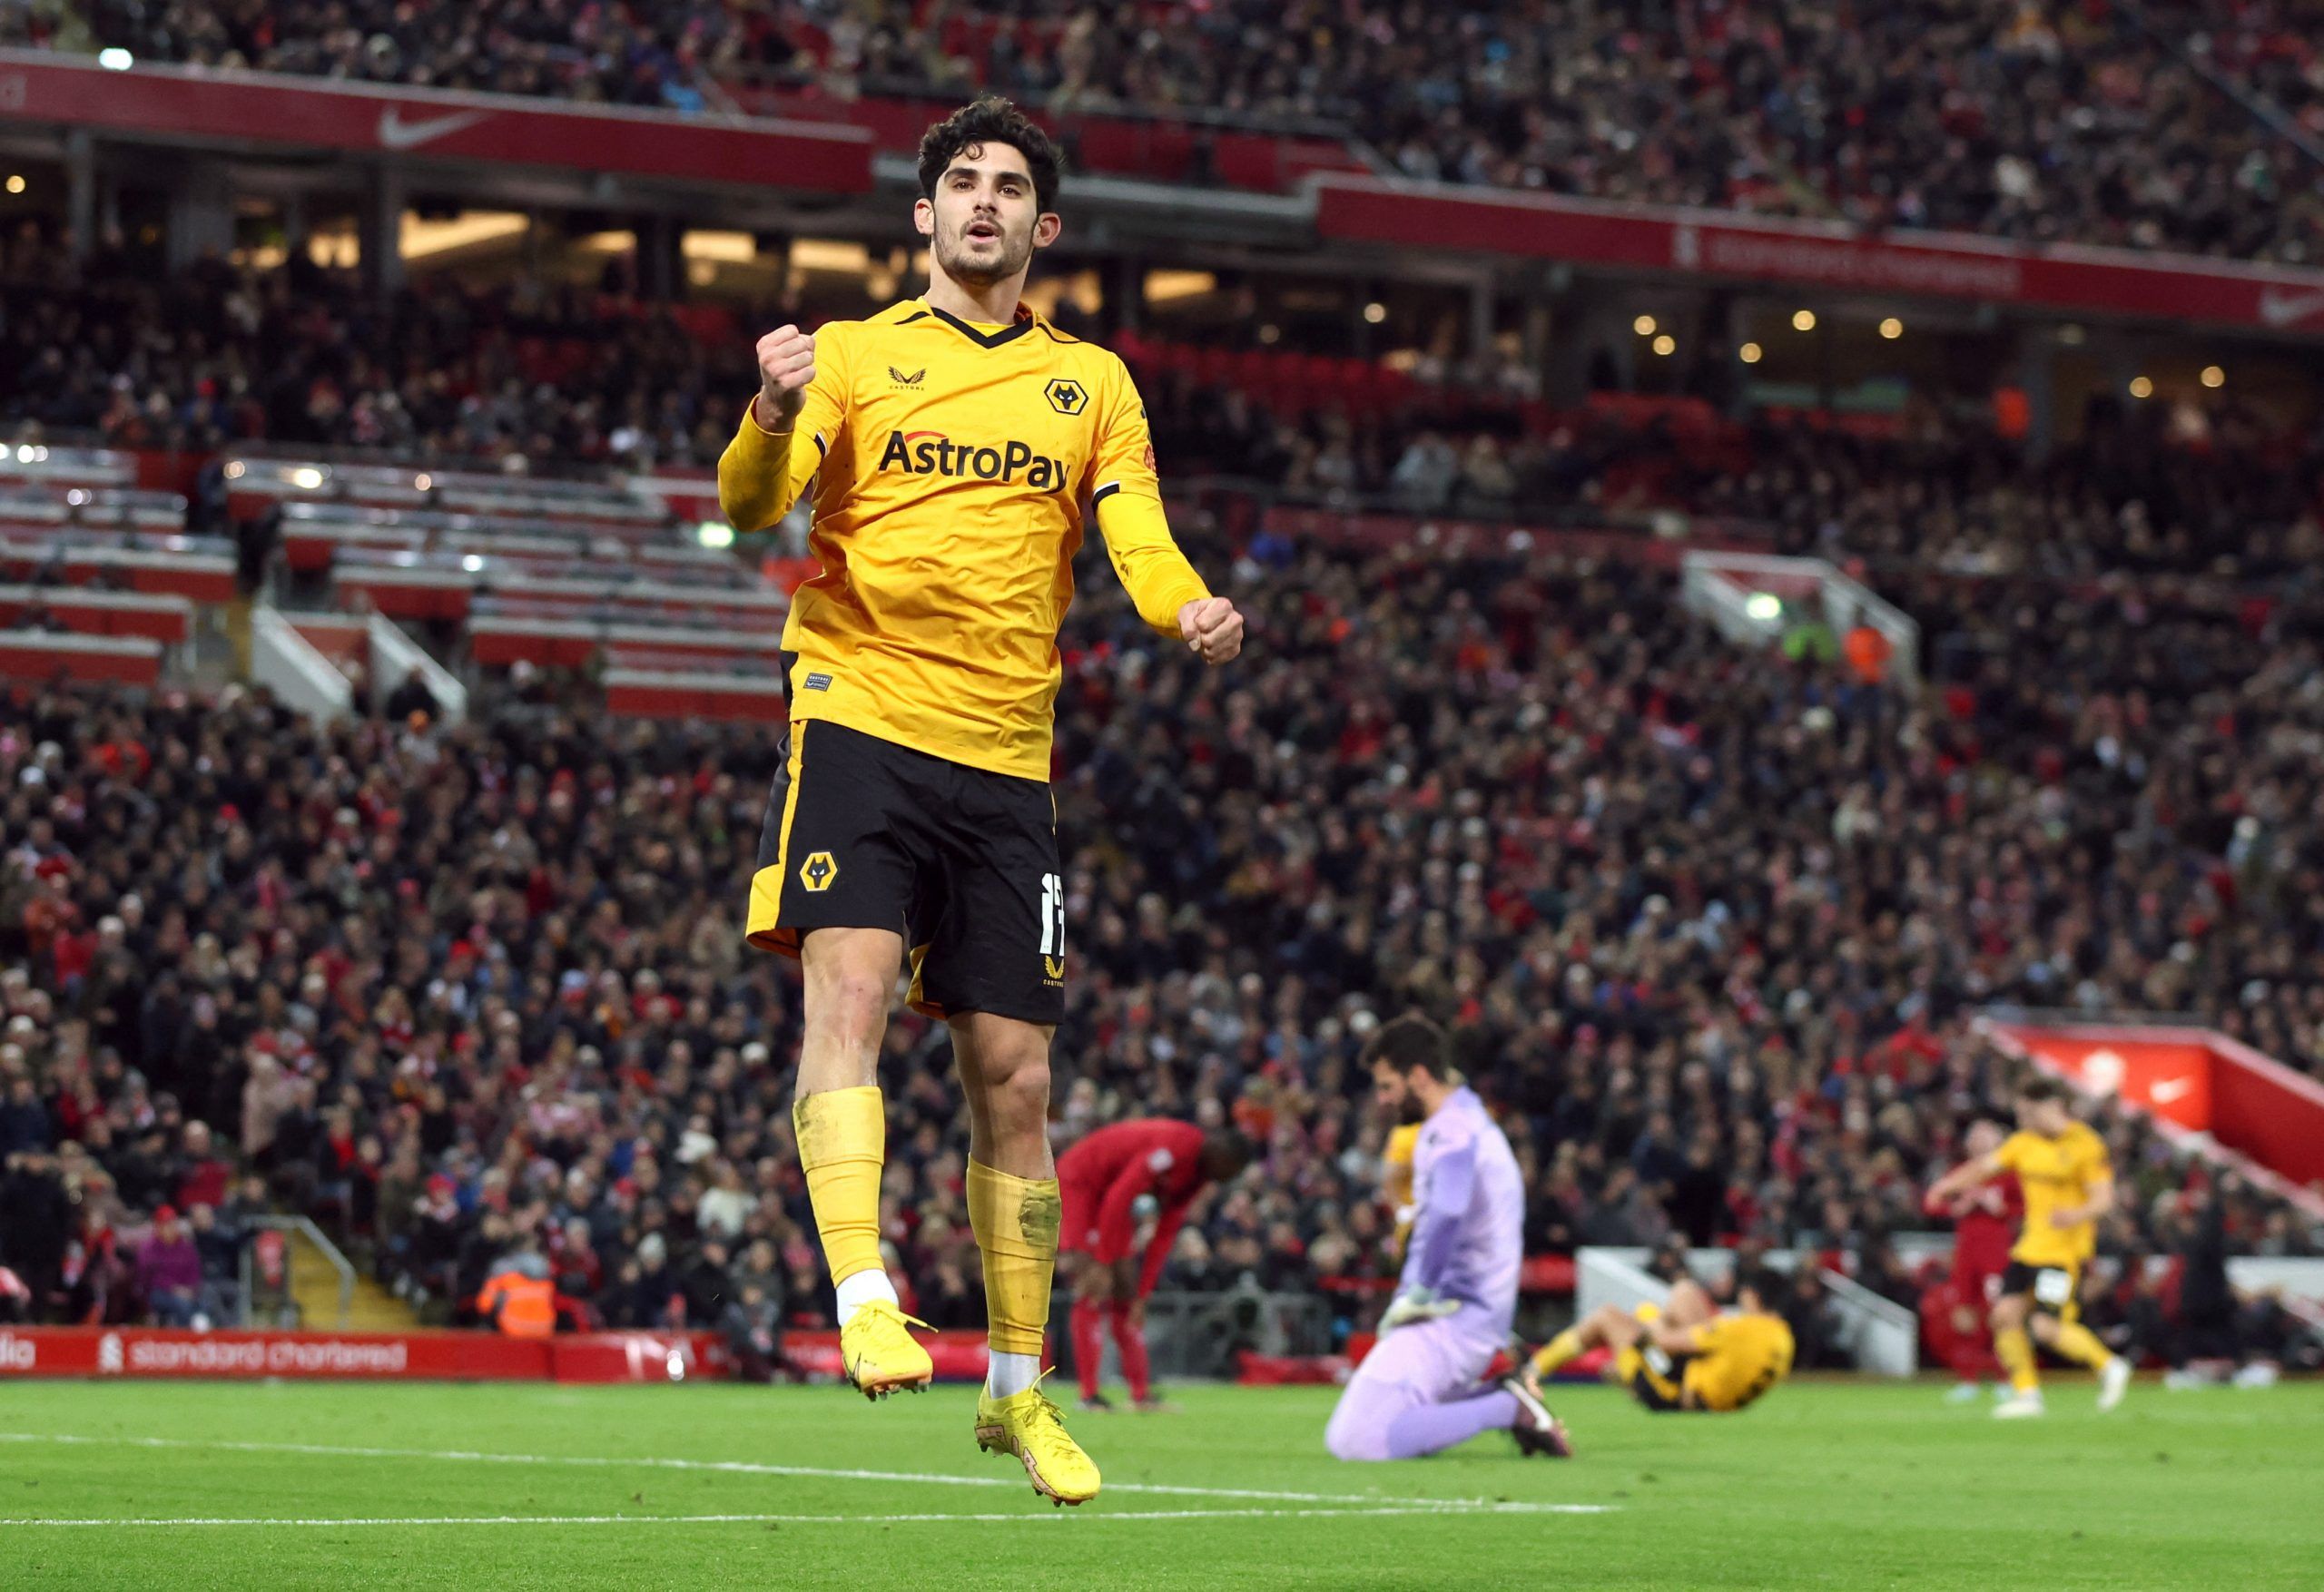 Soccer Football - FA Cup Third Round - Liverpool v Wolverhampton Wanderers - Anfield, Liverpool, Britain - January 7, 2023 Wolverhampton Wanderers' Goncalo Guedes celebrates scoring their first goal as Liverpool's Alisson looks dejected REUTERS/Phil Noble